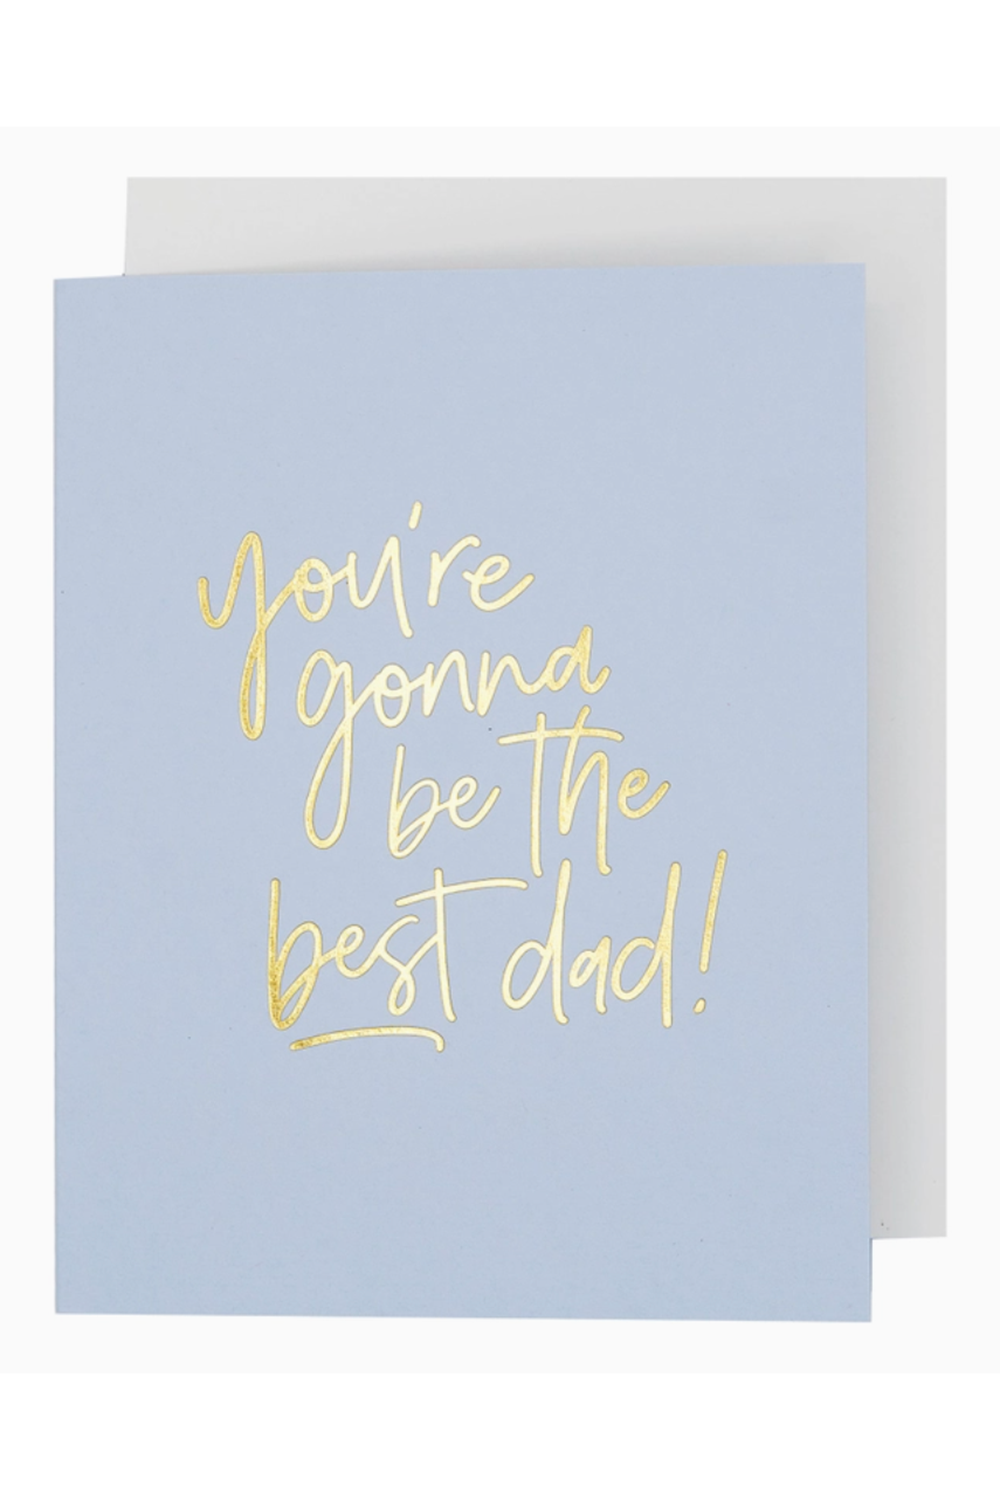 Social Father's Day Greeting Card - Best Dad